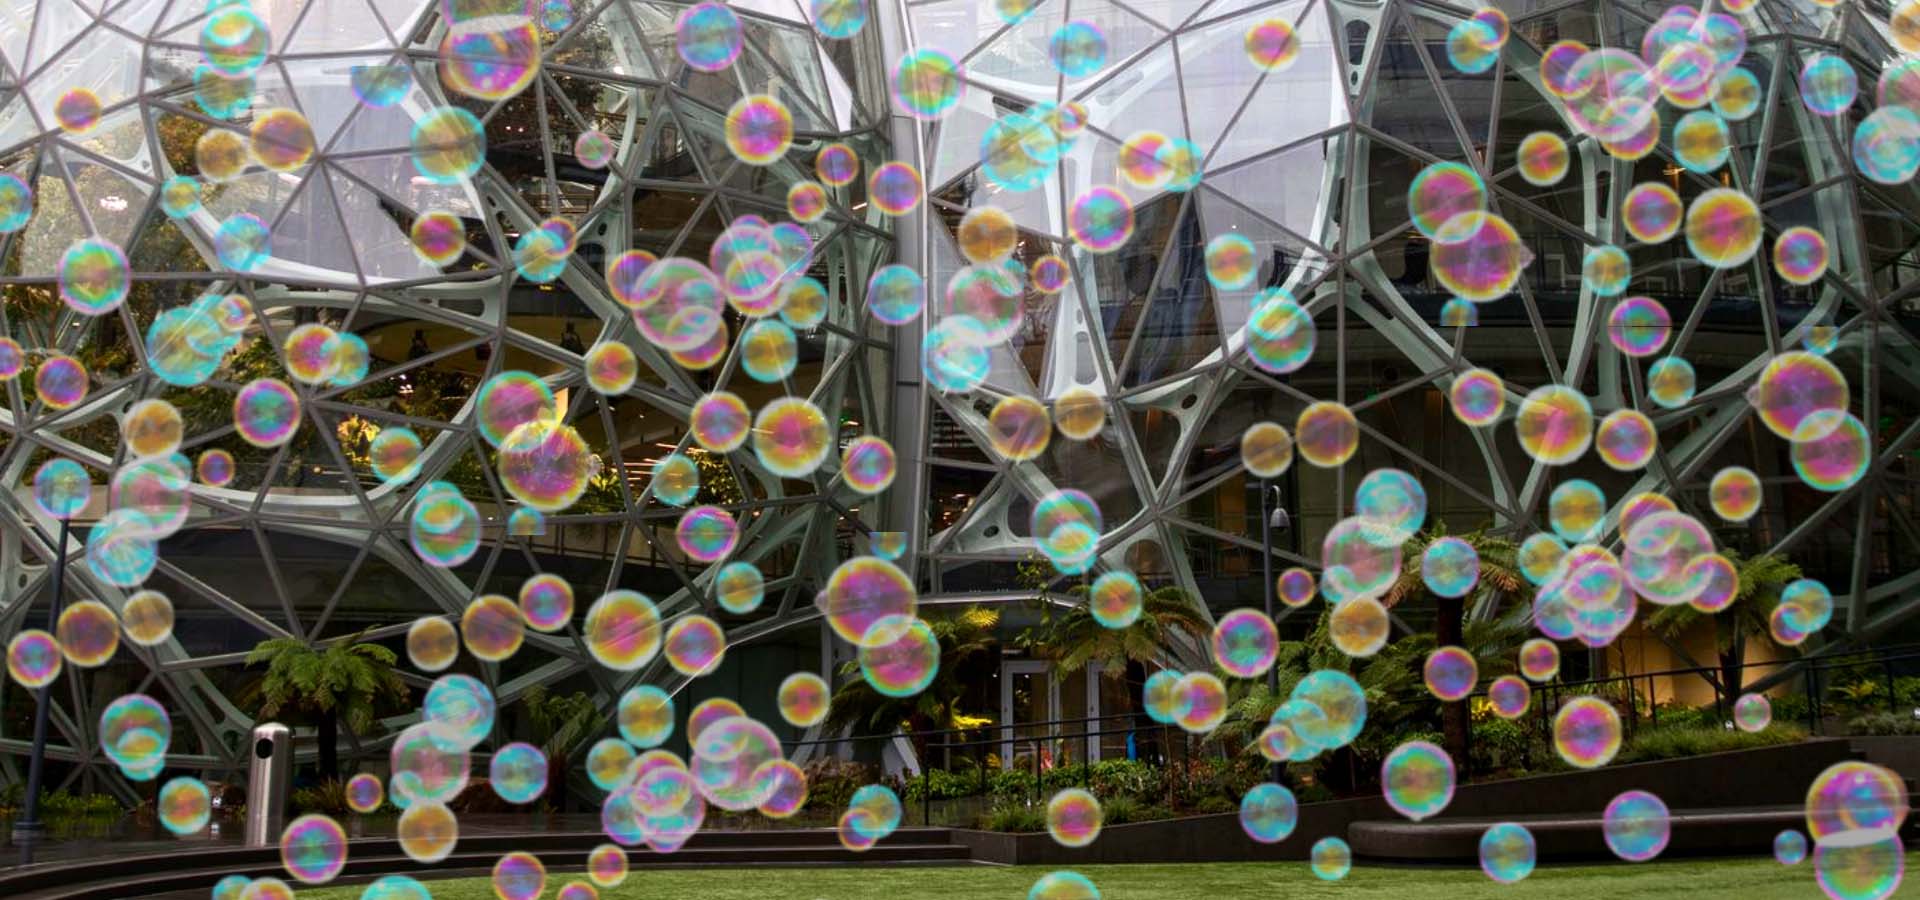 Bubbles floating in front of office buildings that are round/The Amazon Spheres.